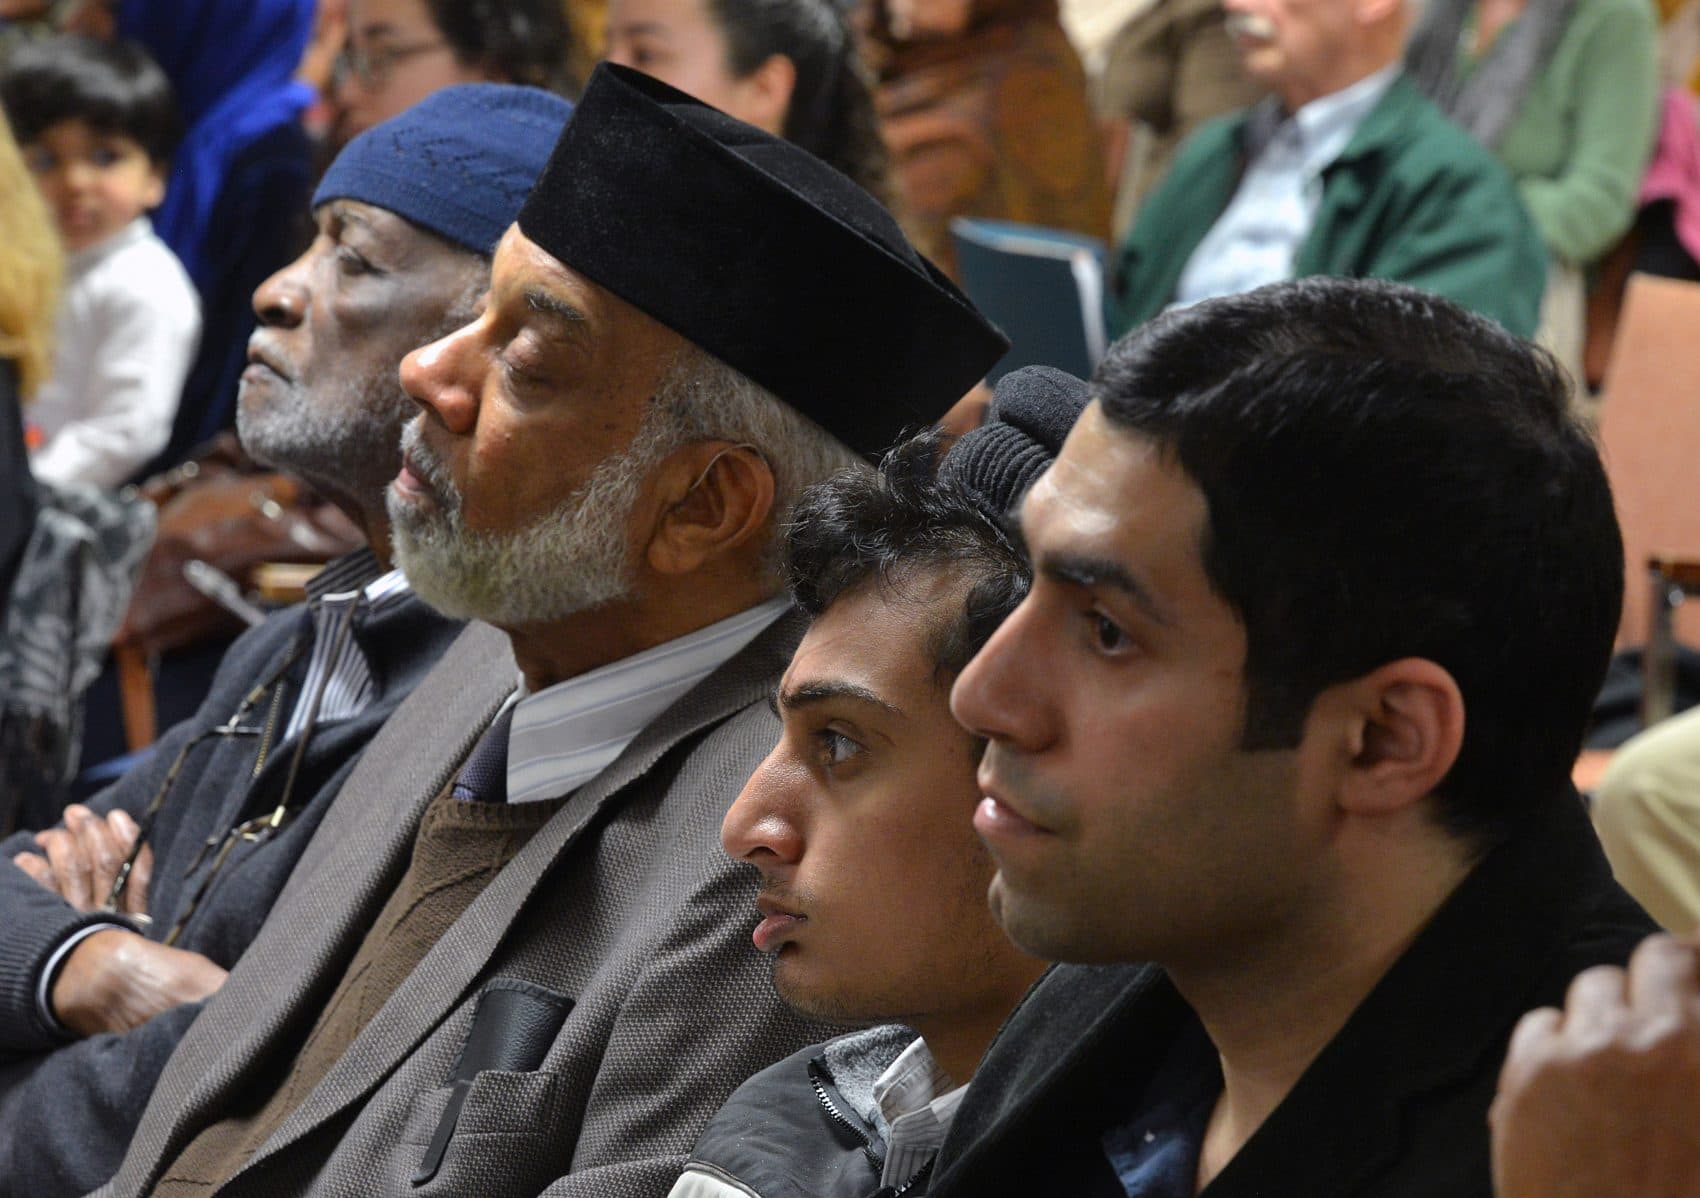 Members of the Ahmadiyya Muslim community listened as Ted Hakey apologized in the room that was marked by his bullets. (Peter Casolino/Special to the Hartford Courant)